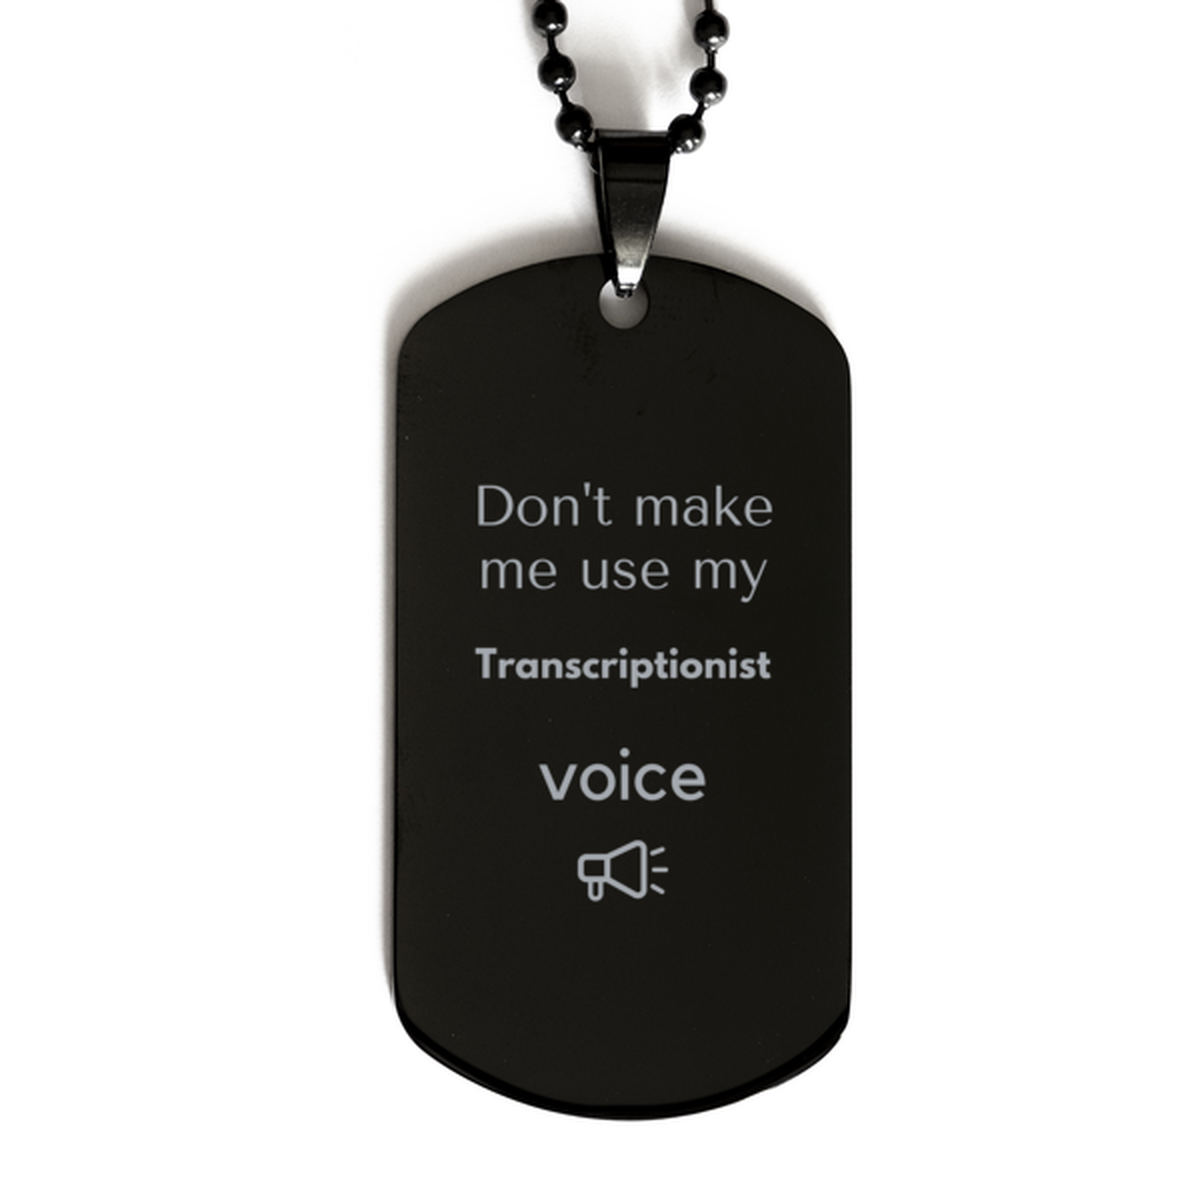 Don't make me use my Transcriptionist voice, Sarcasm Transcriptionist Gifts, Christmas Transcriptionist Black Dog Tag Birthday Unique Gifts For Transcriptionist Coworkers, Men, Women, Colleague, Friends